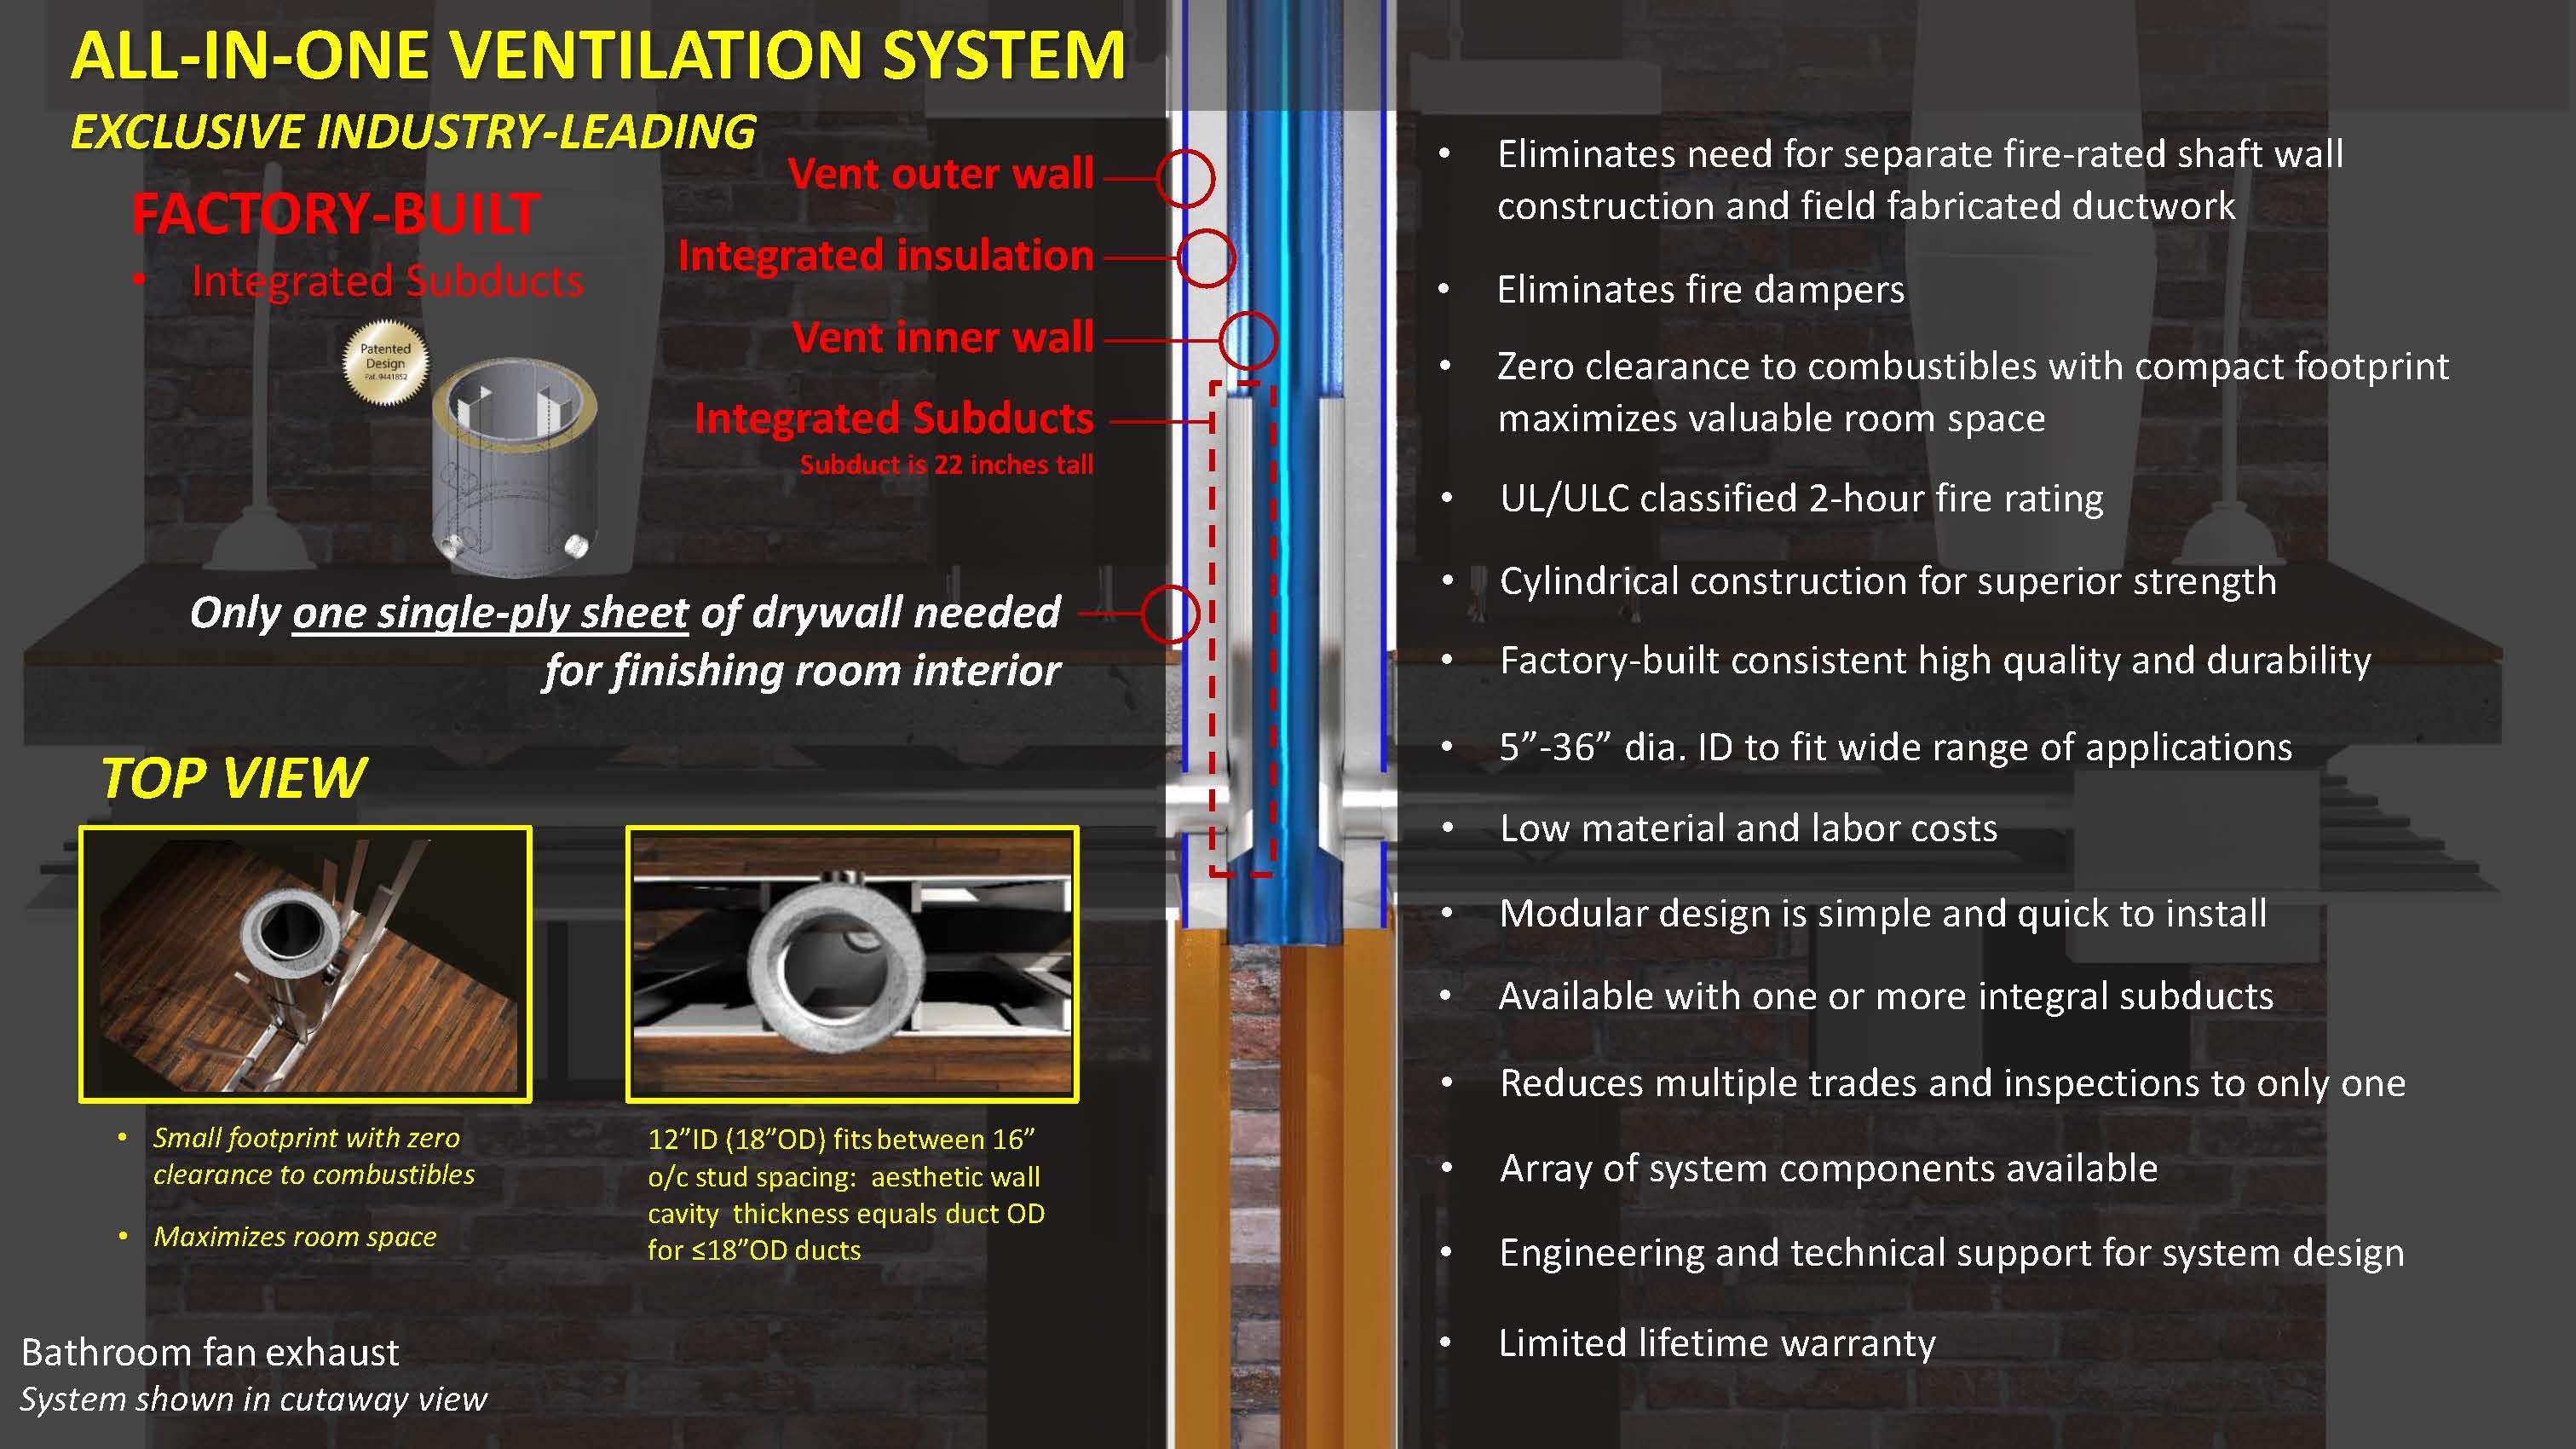 All-In-One Factory-Built Ventilation System